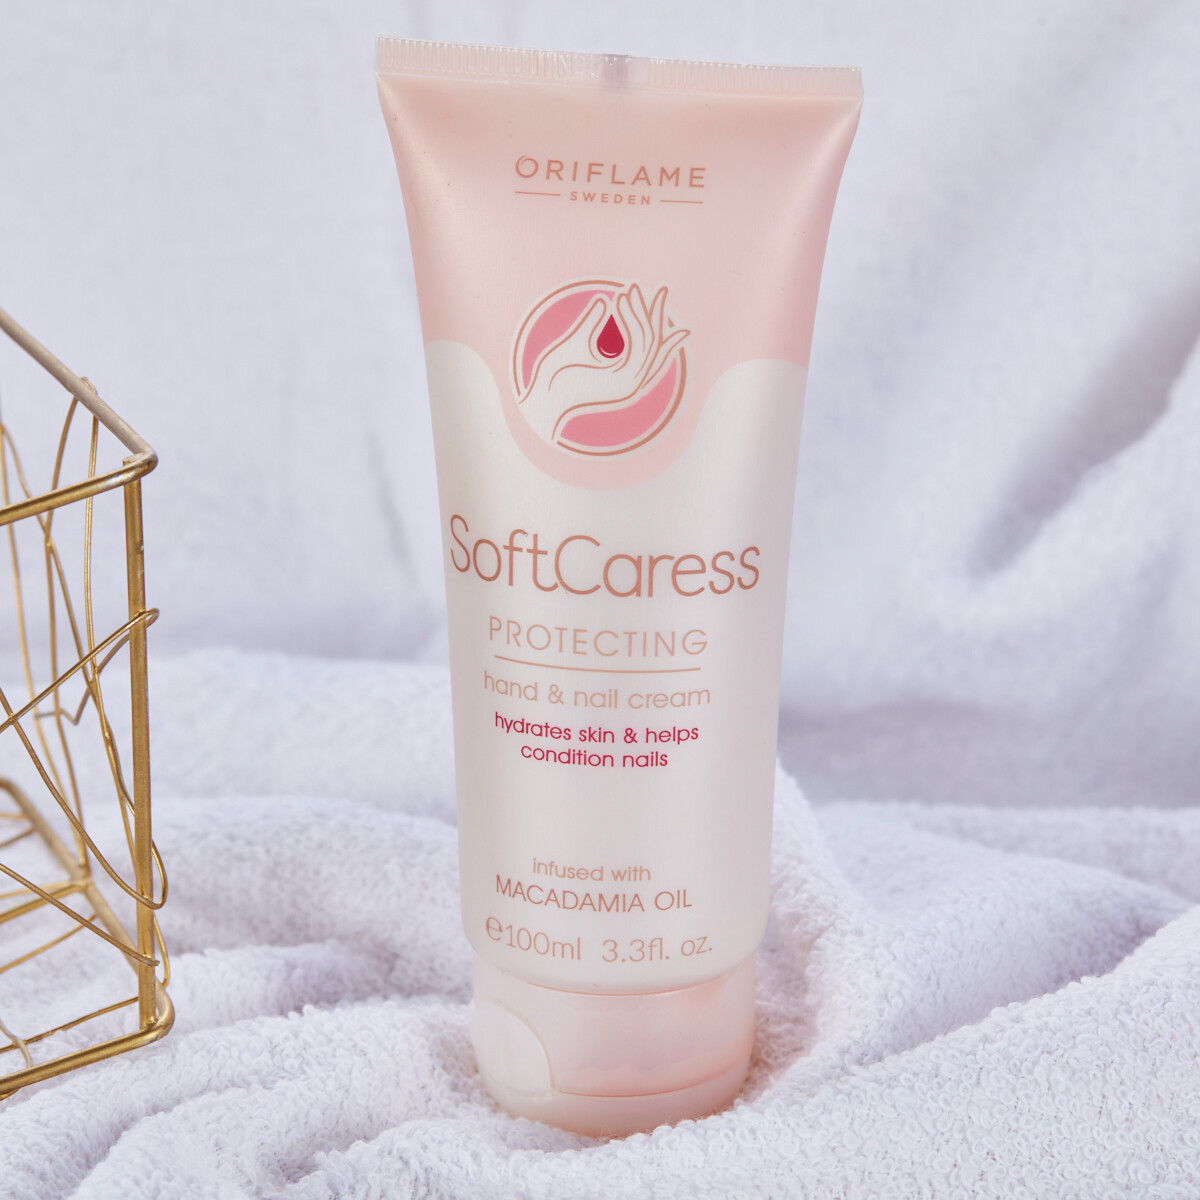 Beauty Consultant From Oriflame By DaZi - Soft Caress Protecting Hand & Nail  Cream. A light and fast absorbing hand cream that nourishes and conditions  hands and nails. Formulated with intensively moisturising